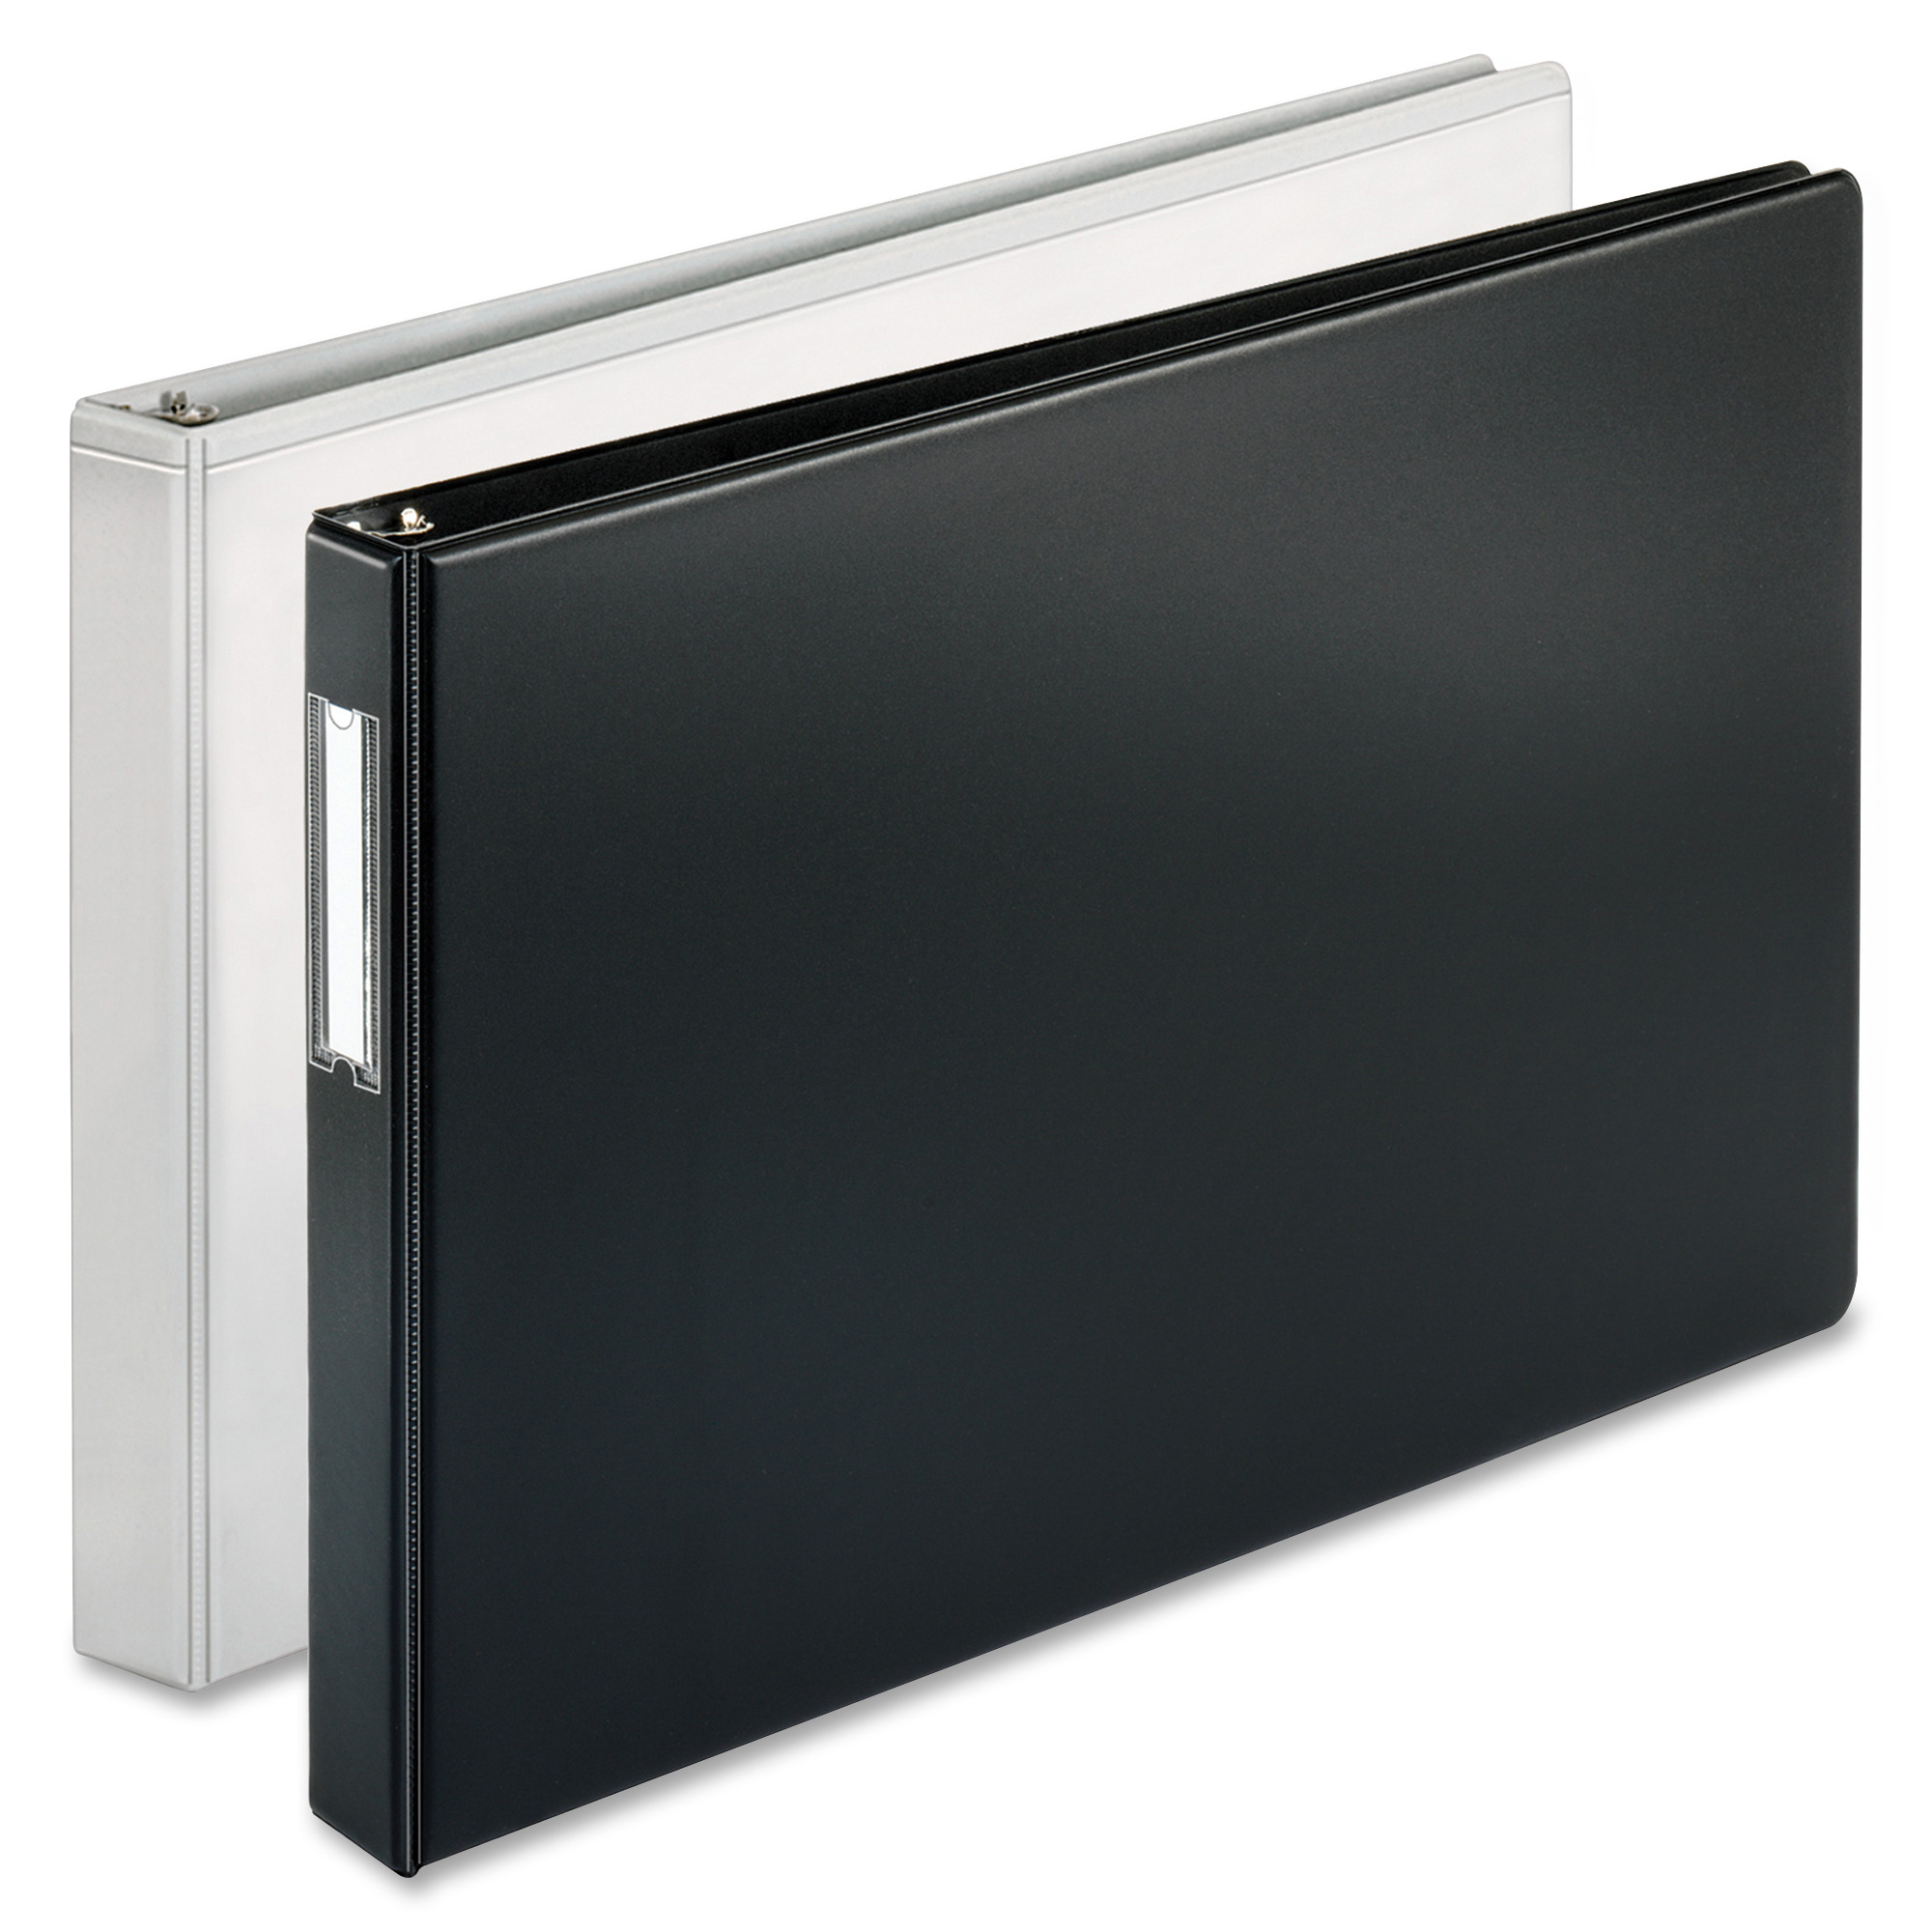 11x17 Binder Vinyl Panel with pockets Featuring a 4 Post White